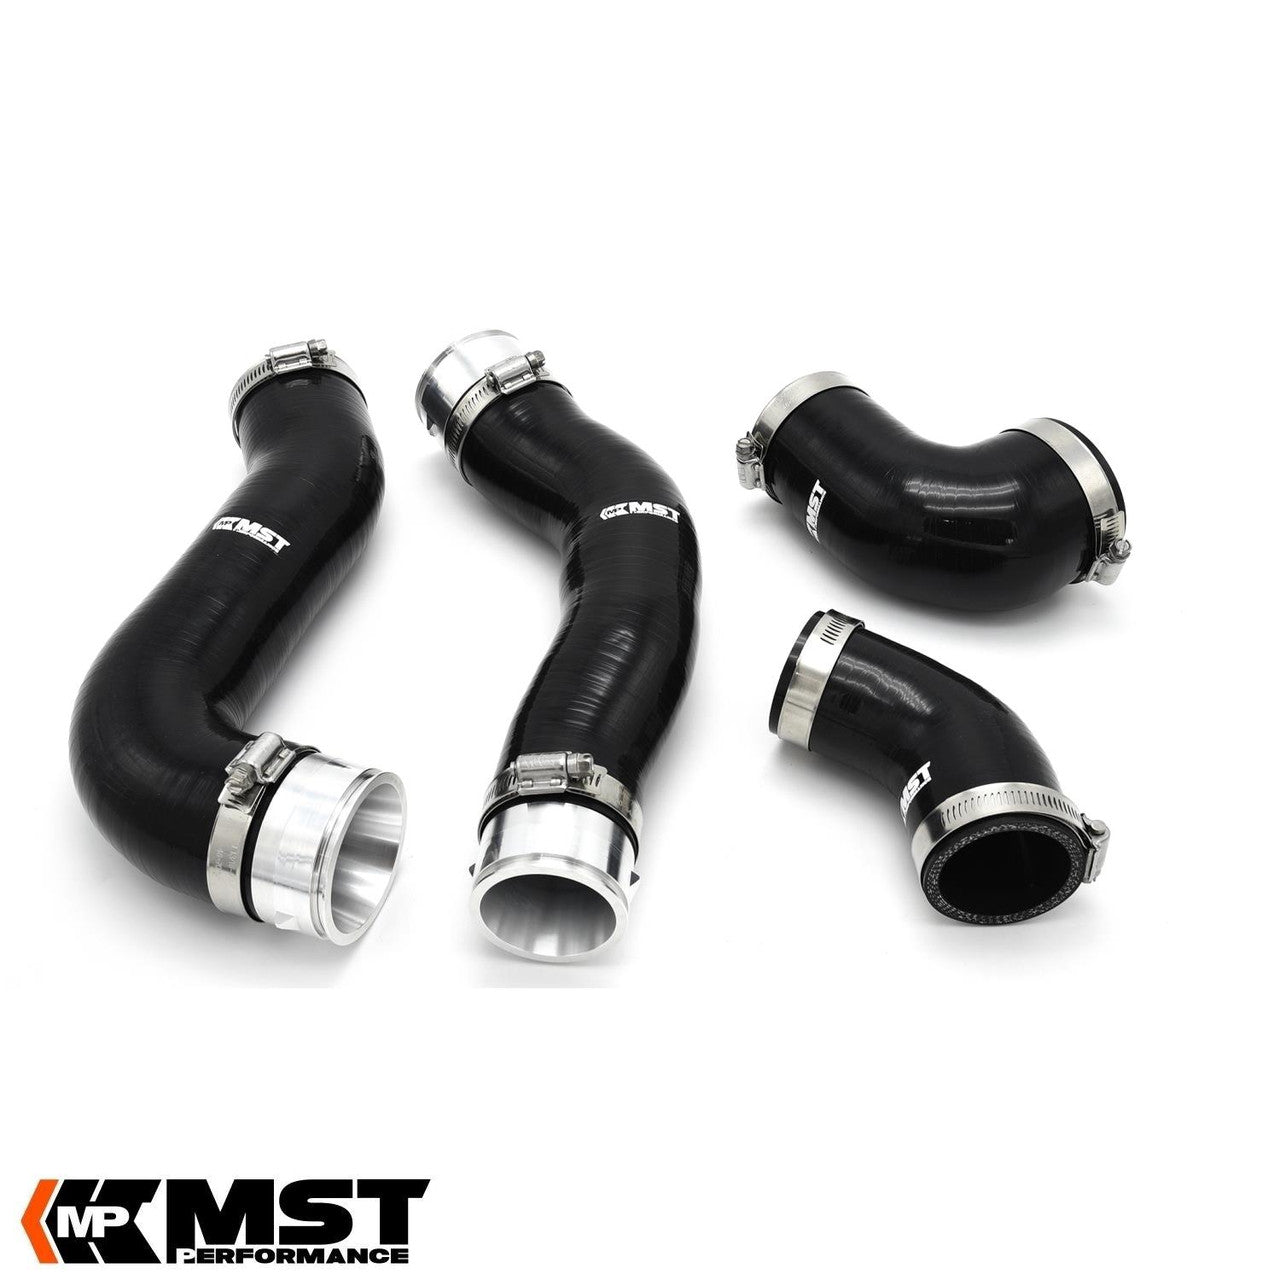  MST Performance Black Silicone Boost...